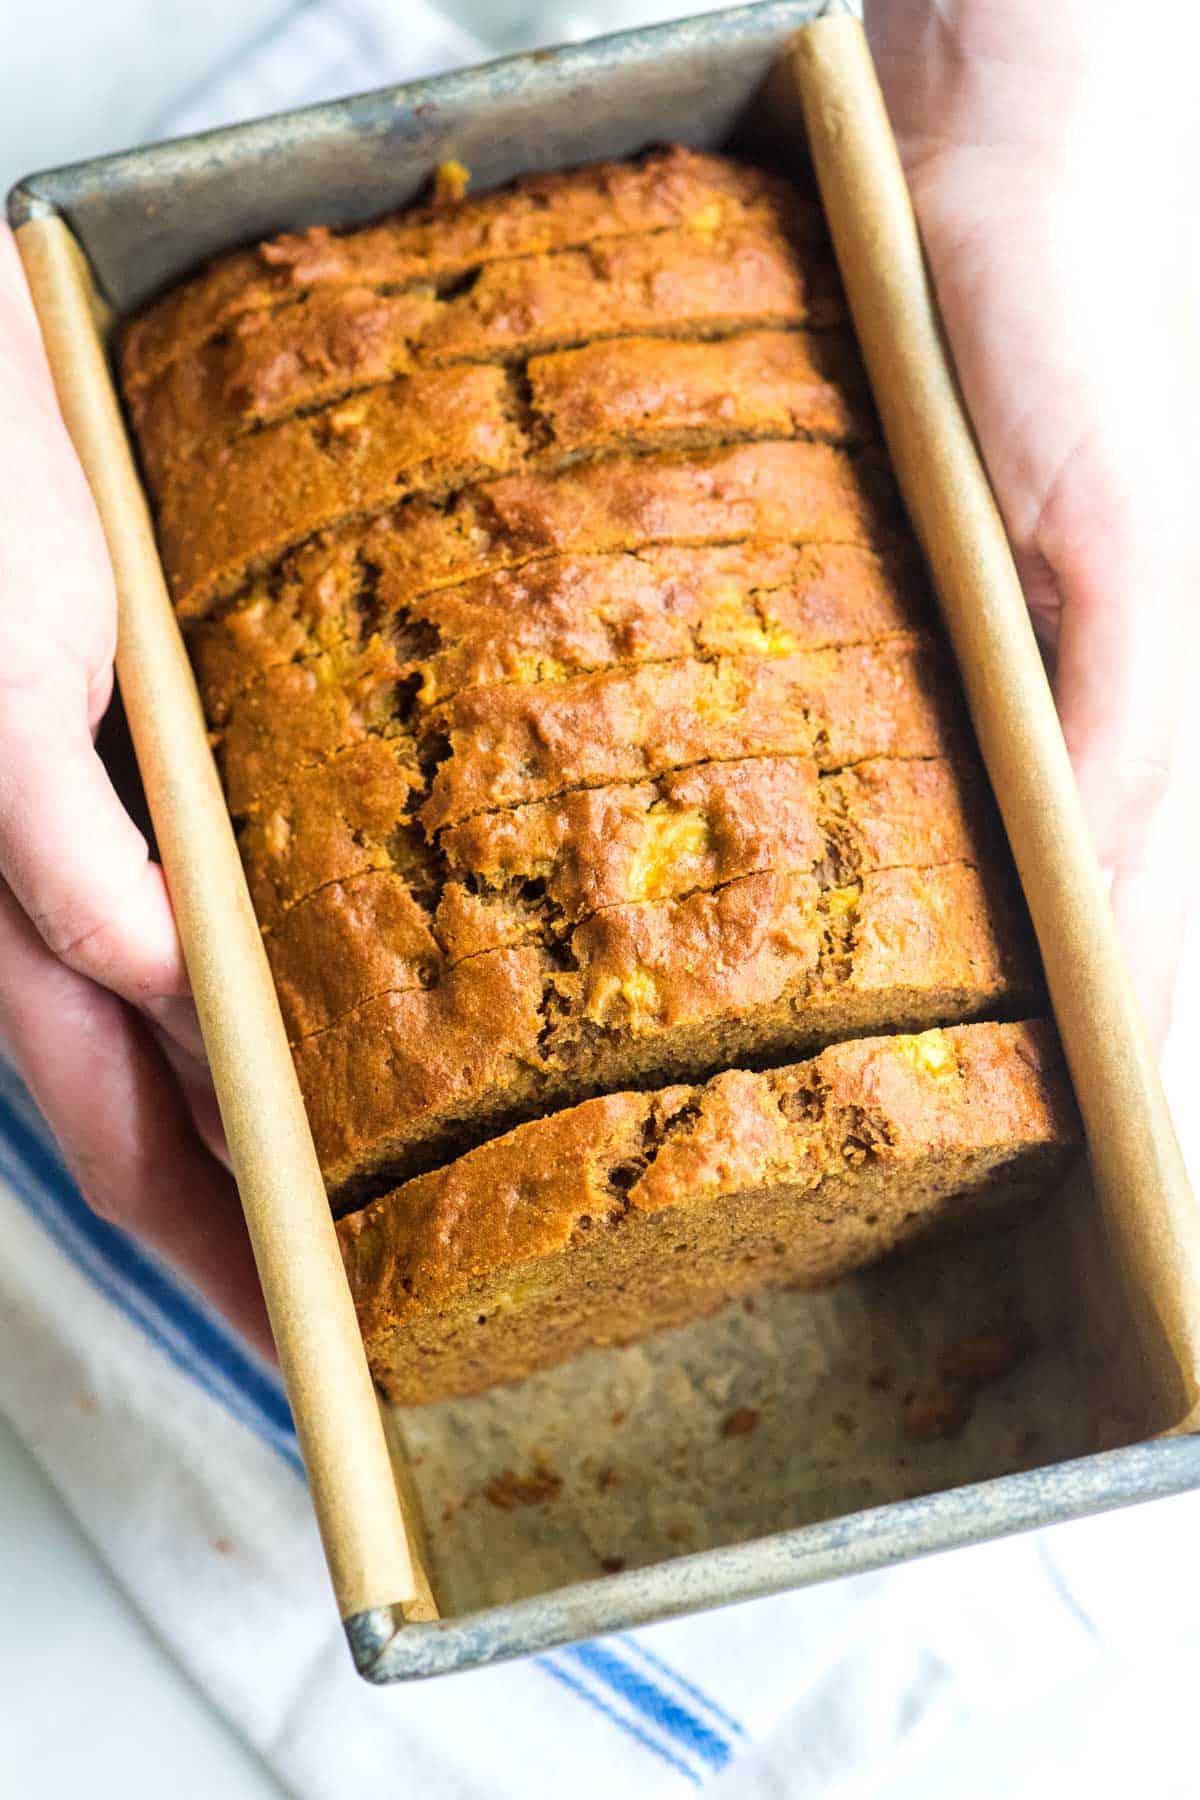 baked banana bread made with lower sugar, healthier fats and added whole grains